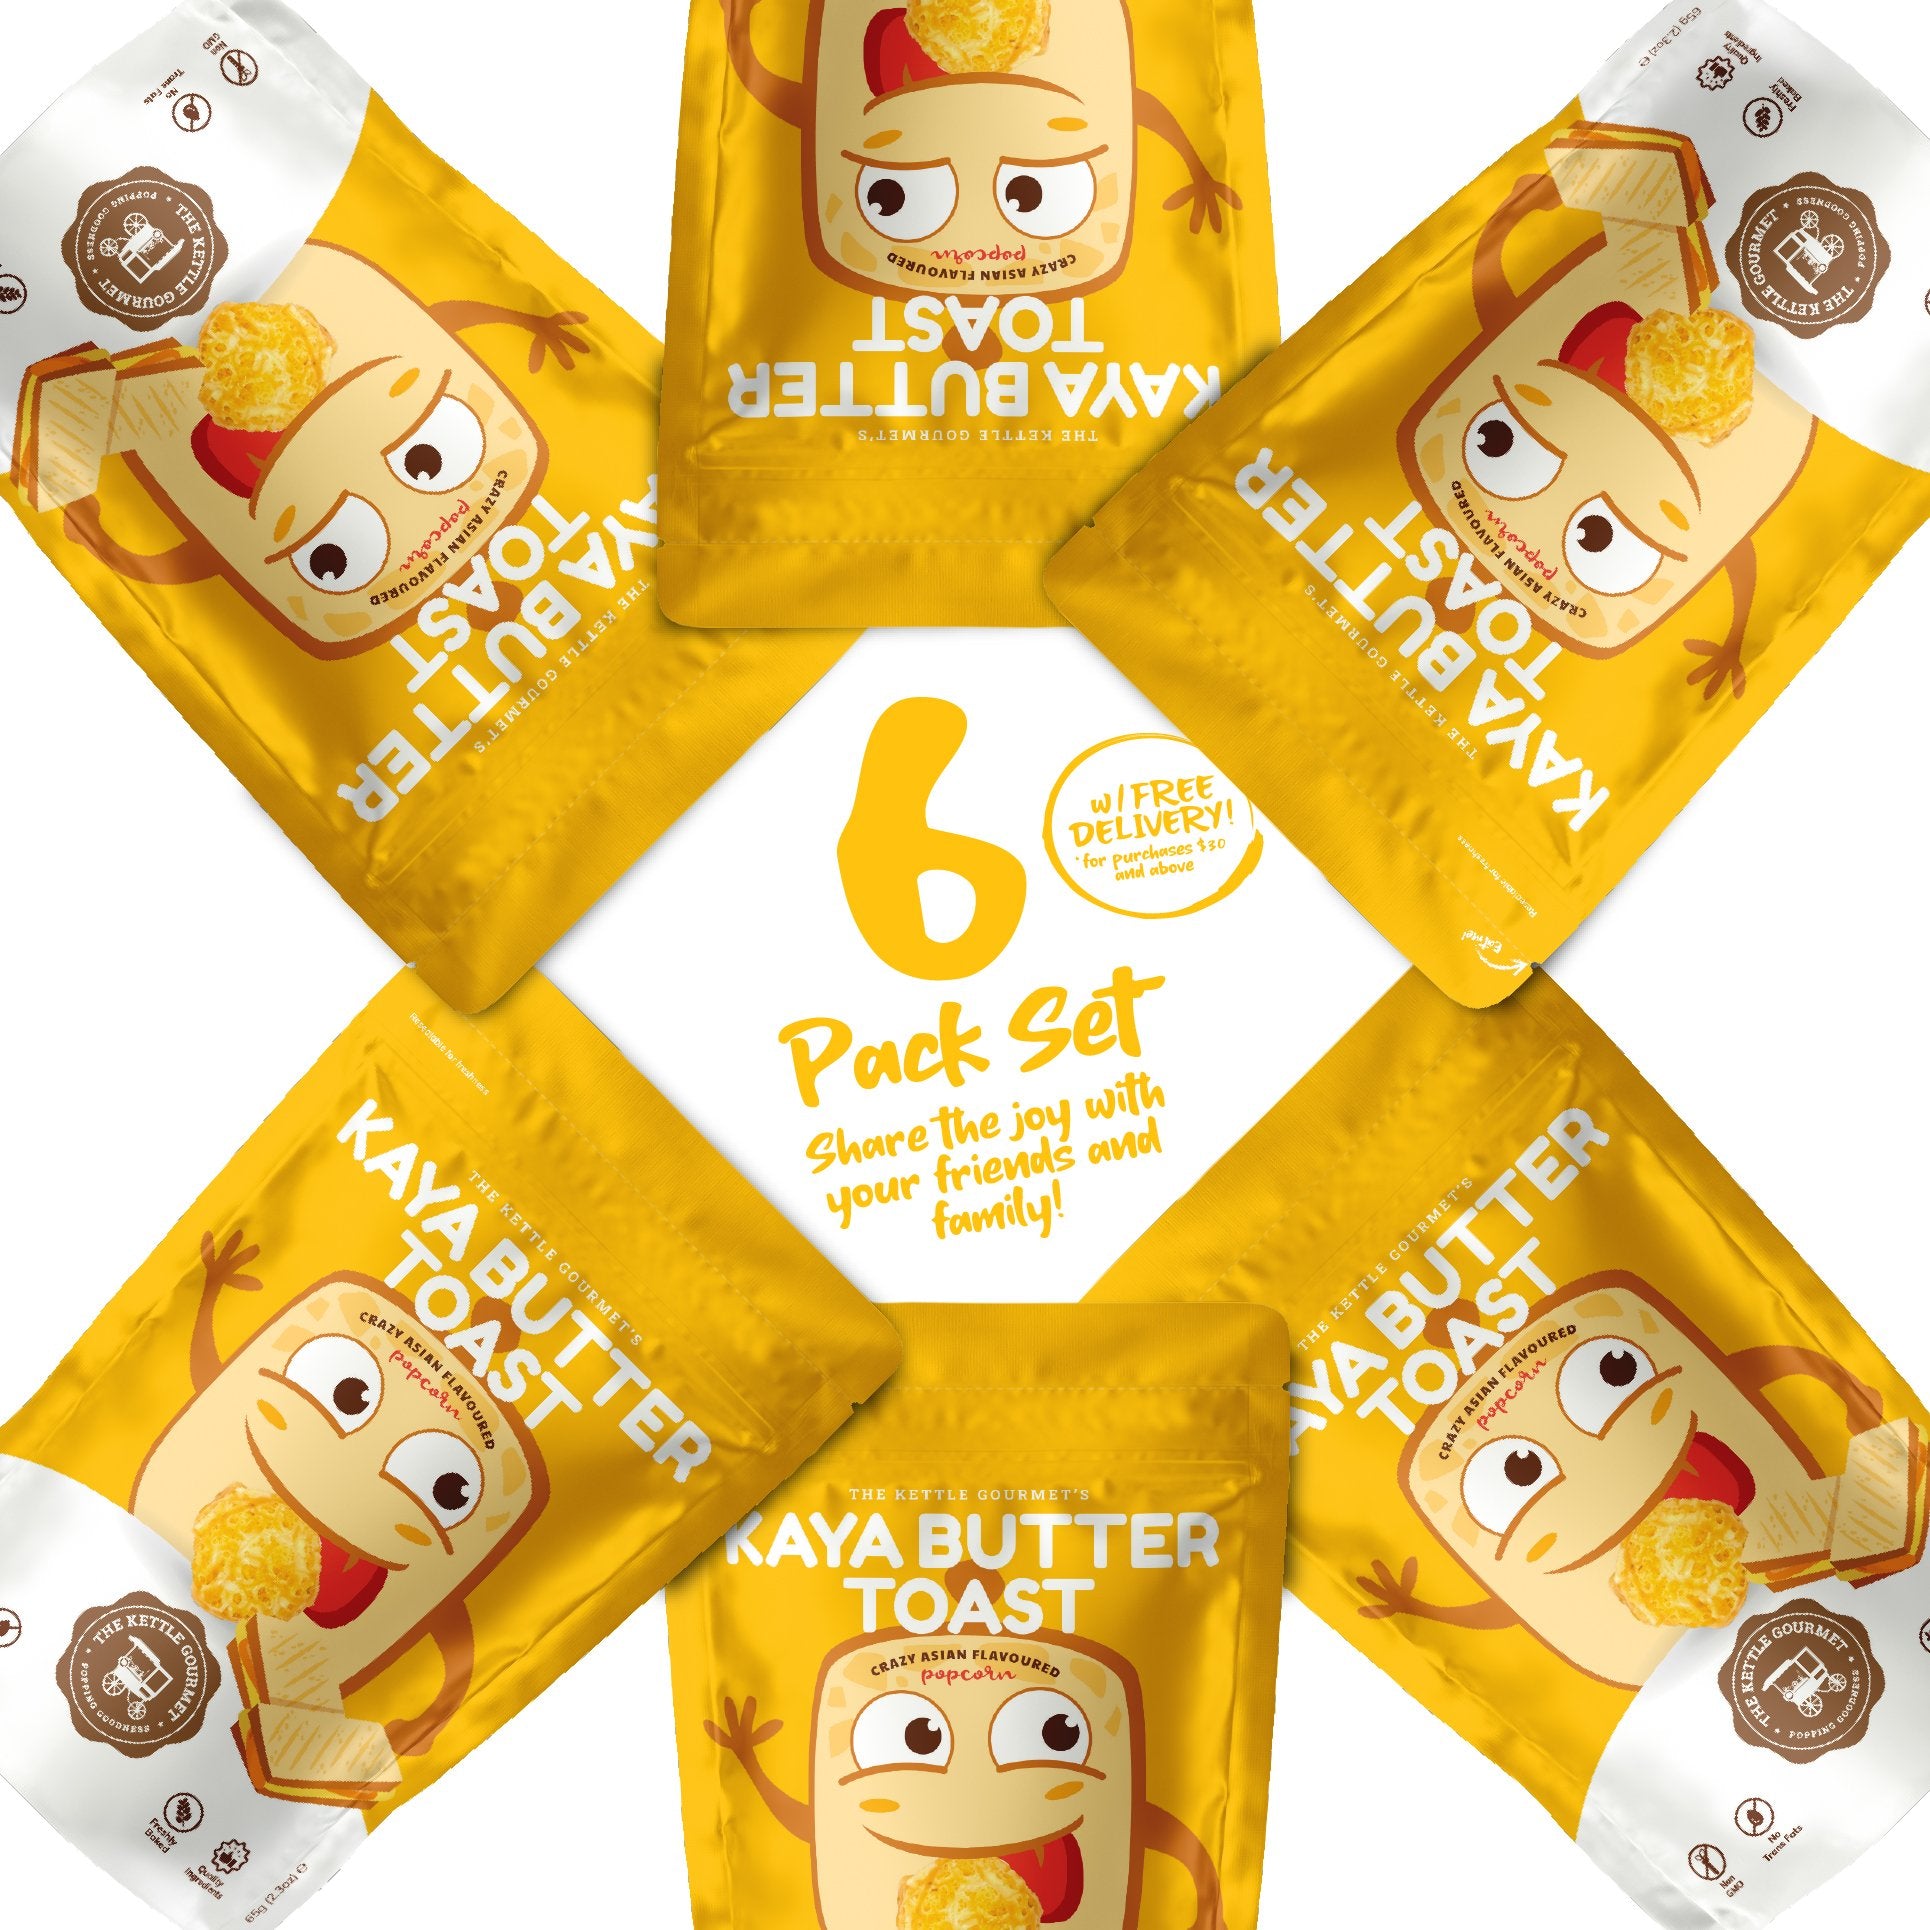 The Kettle Gourmet's Kaya Butter Toast 6 pack set containing 6 Kaya Butter Toast Snack Monsters